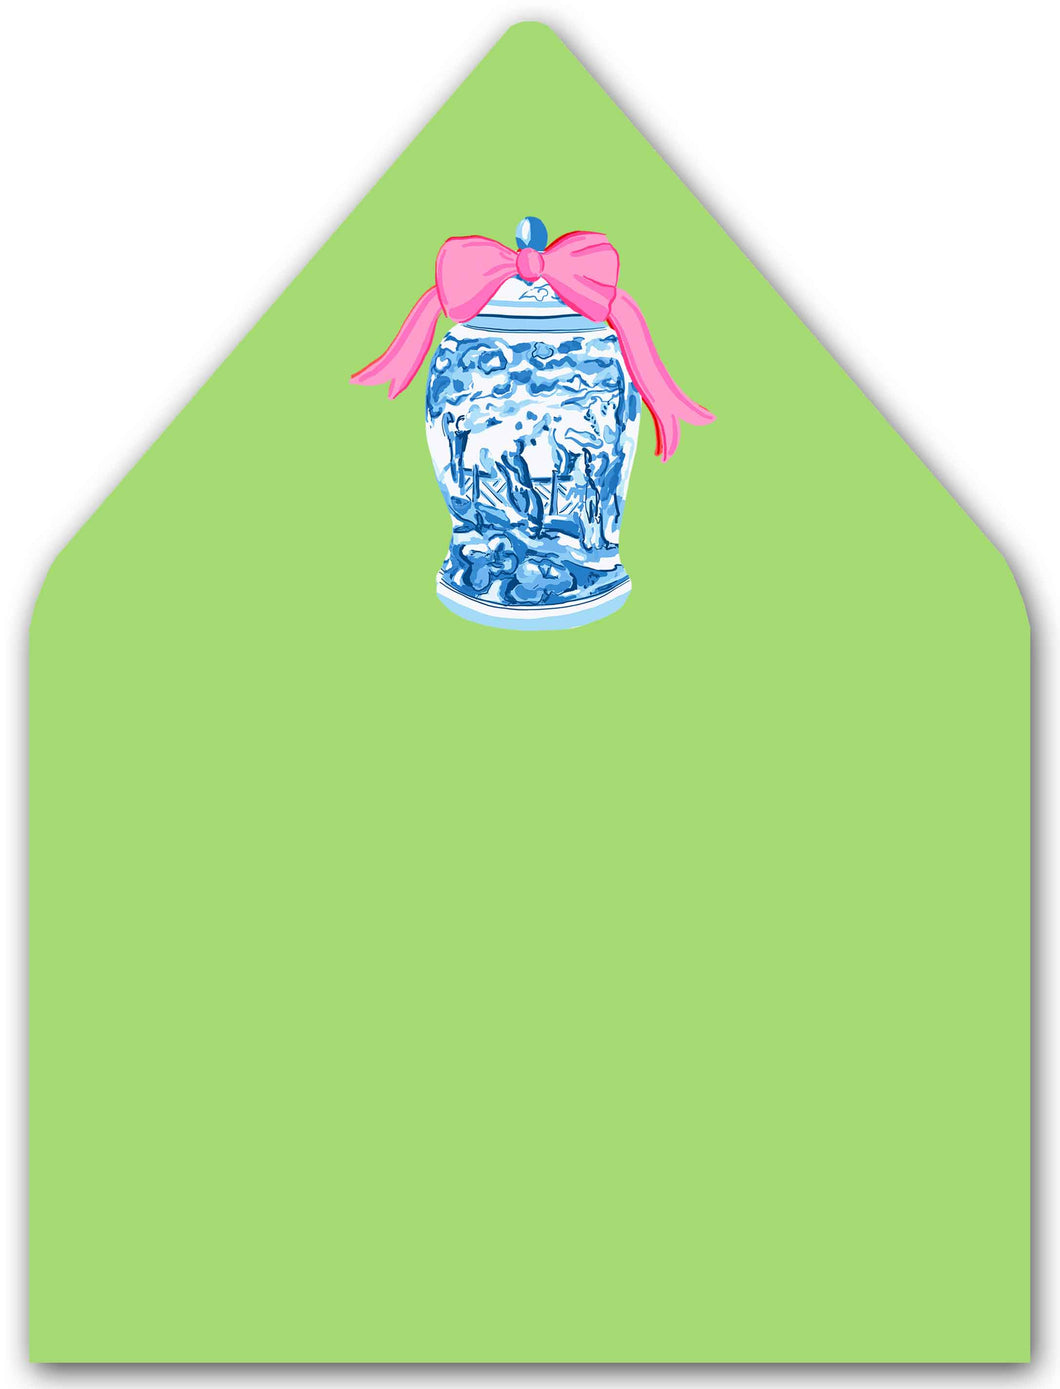 Ginger Jar with Pink Bow A9 Patterned Envelope Liners